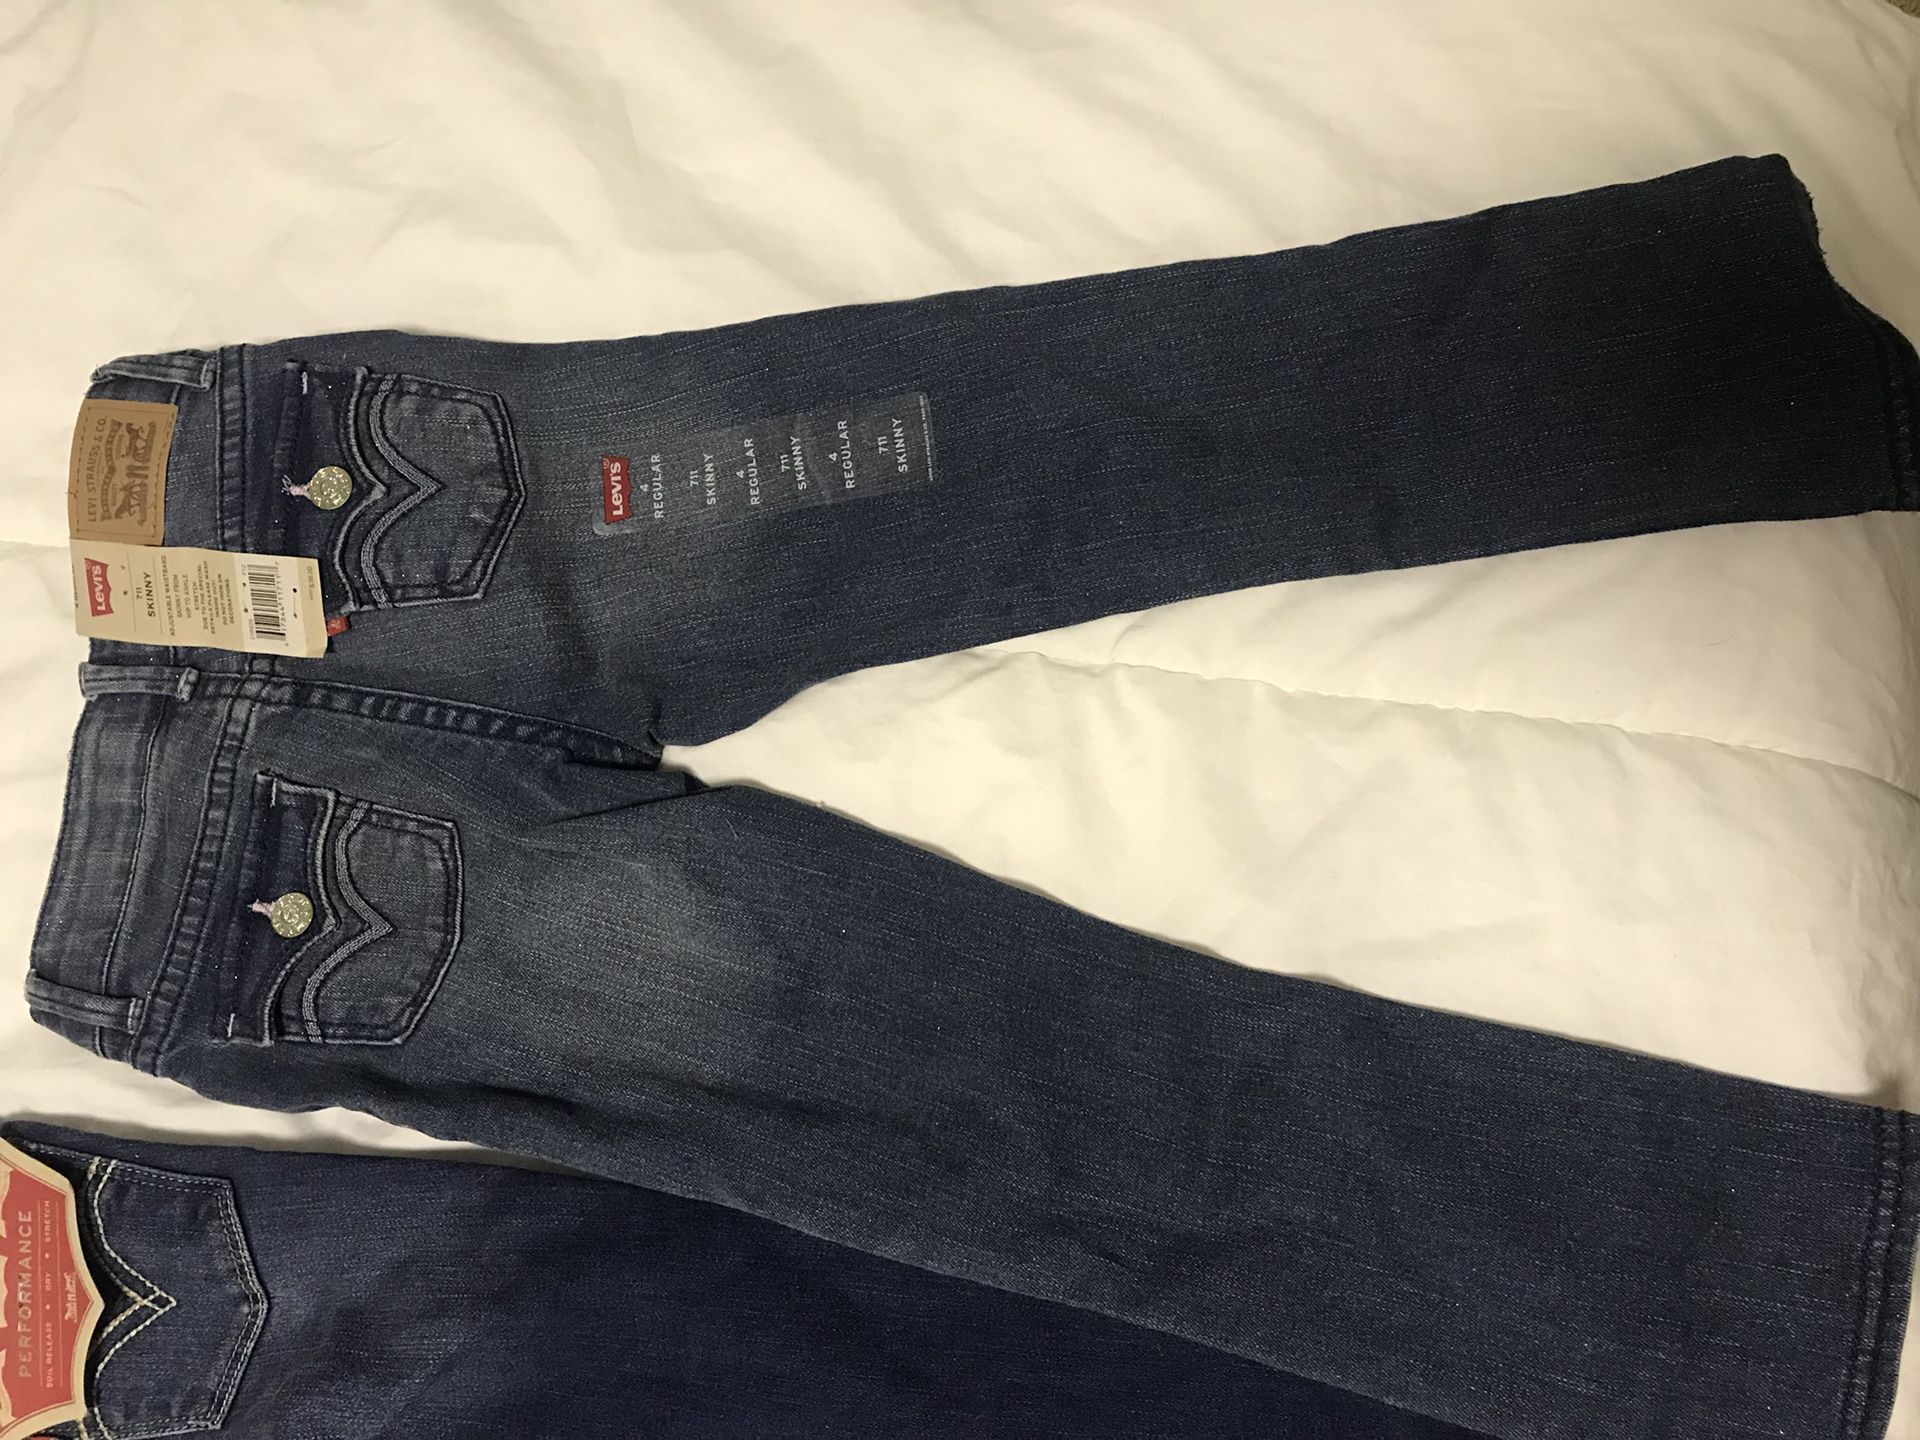 Levi jeans and polo legging